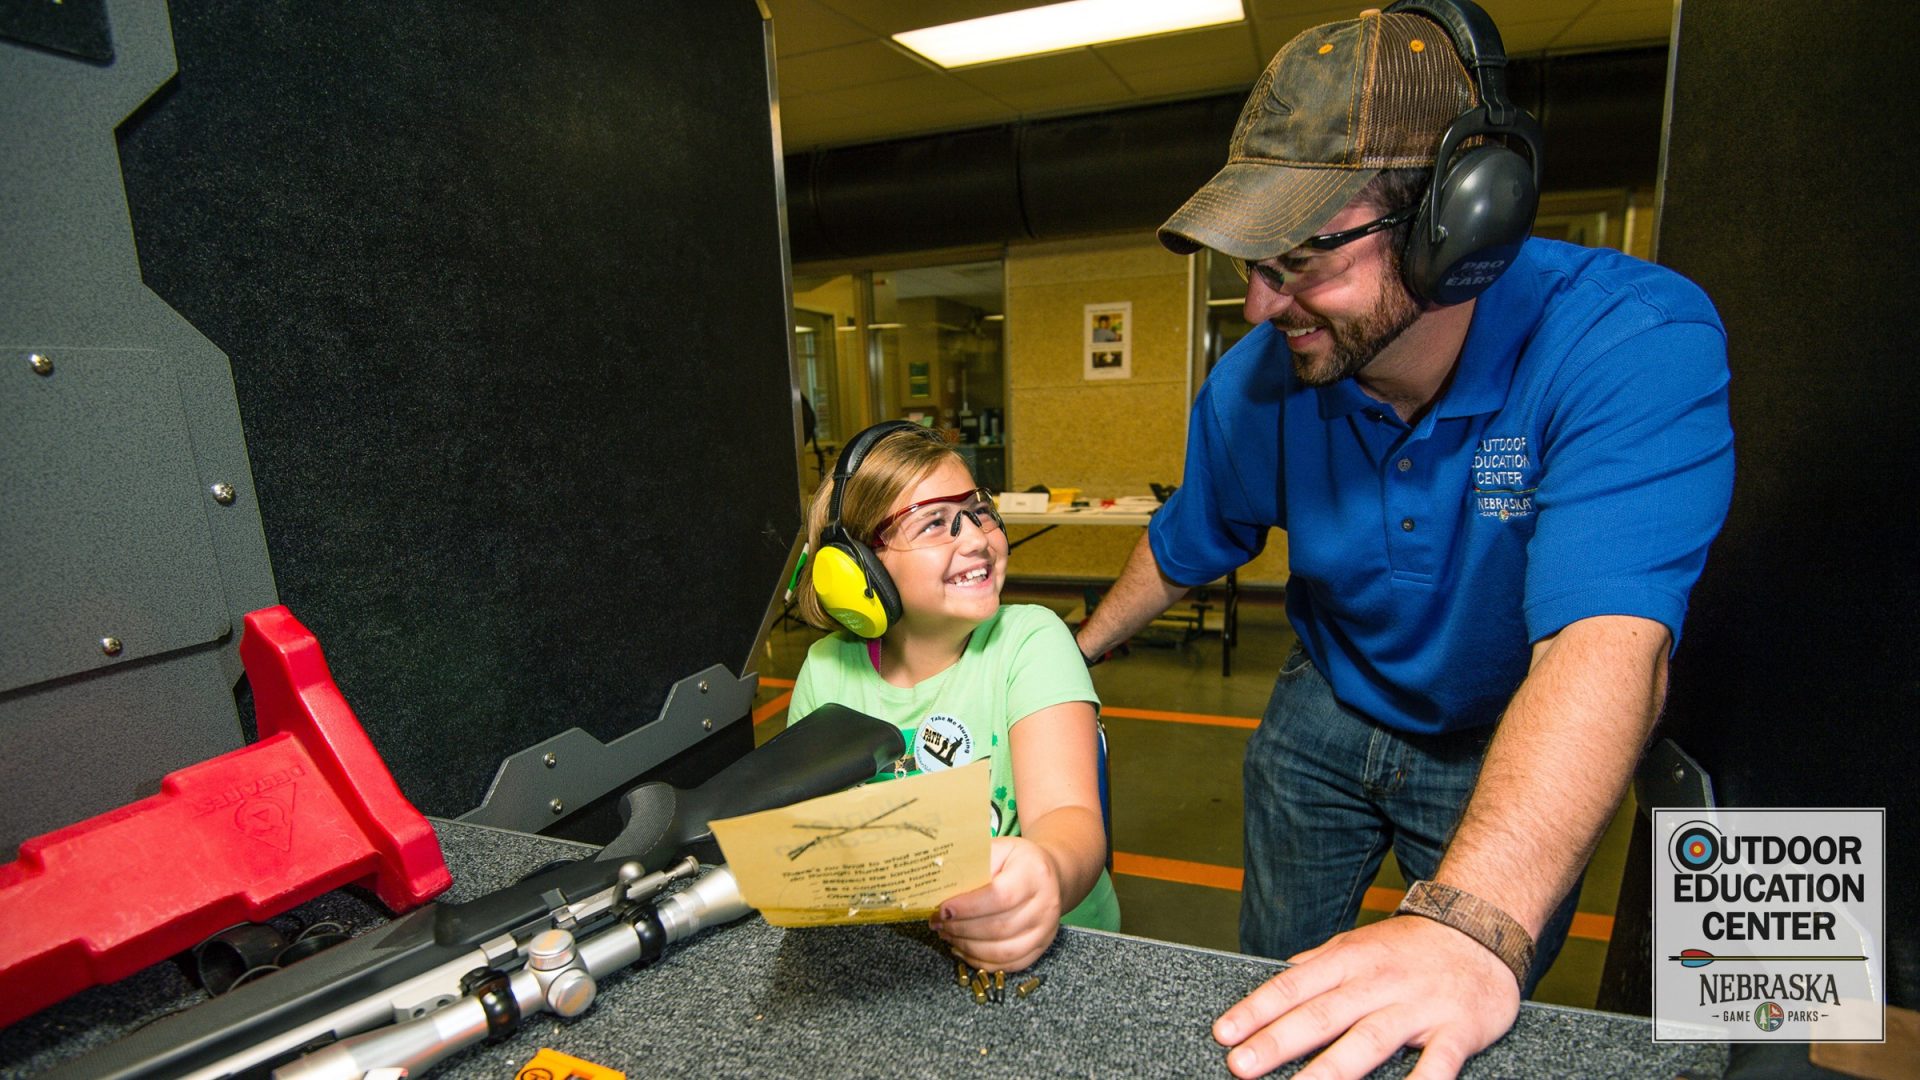 Student and instructor look at rifle target in firearm range